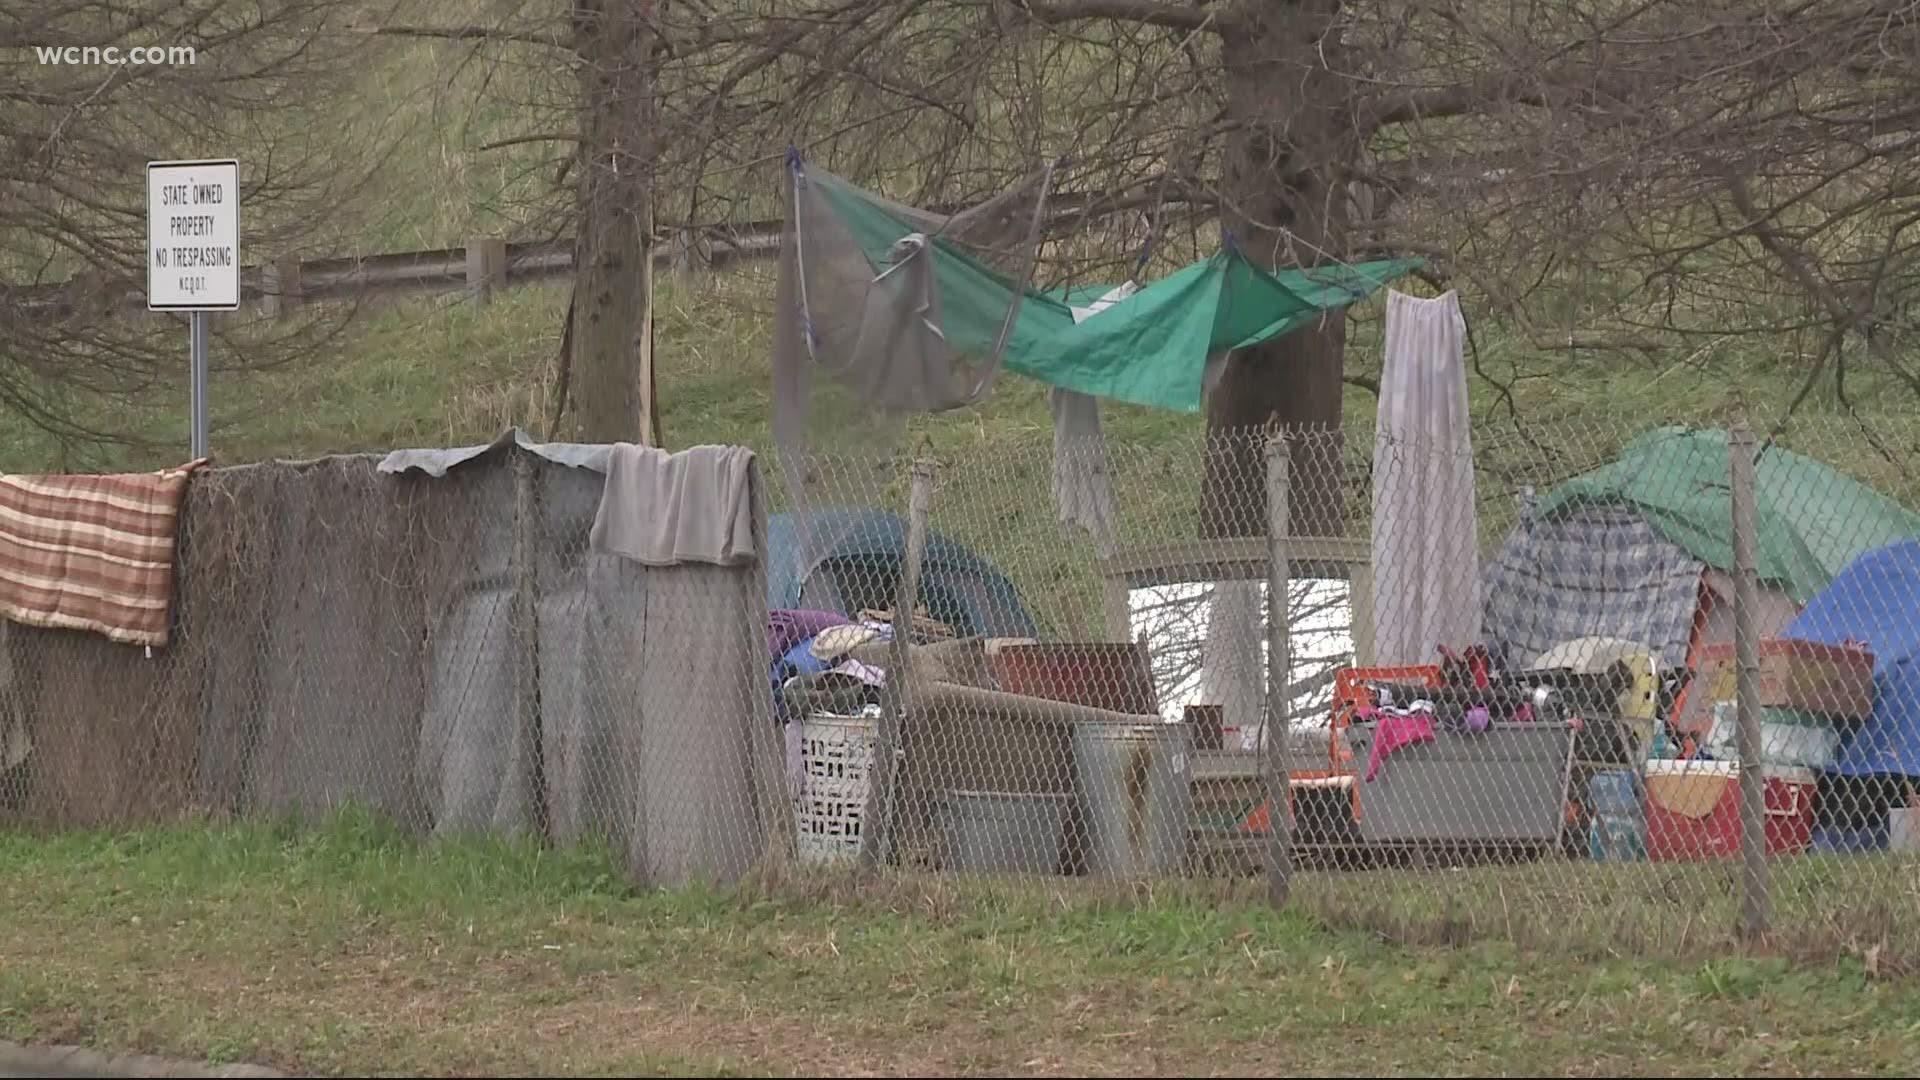 Mecklenburg County is offering free hotel rooms for 90 days, but there's still no long-term solution in place to address Charlotte's homelessness situation.